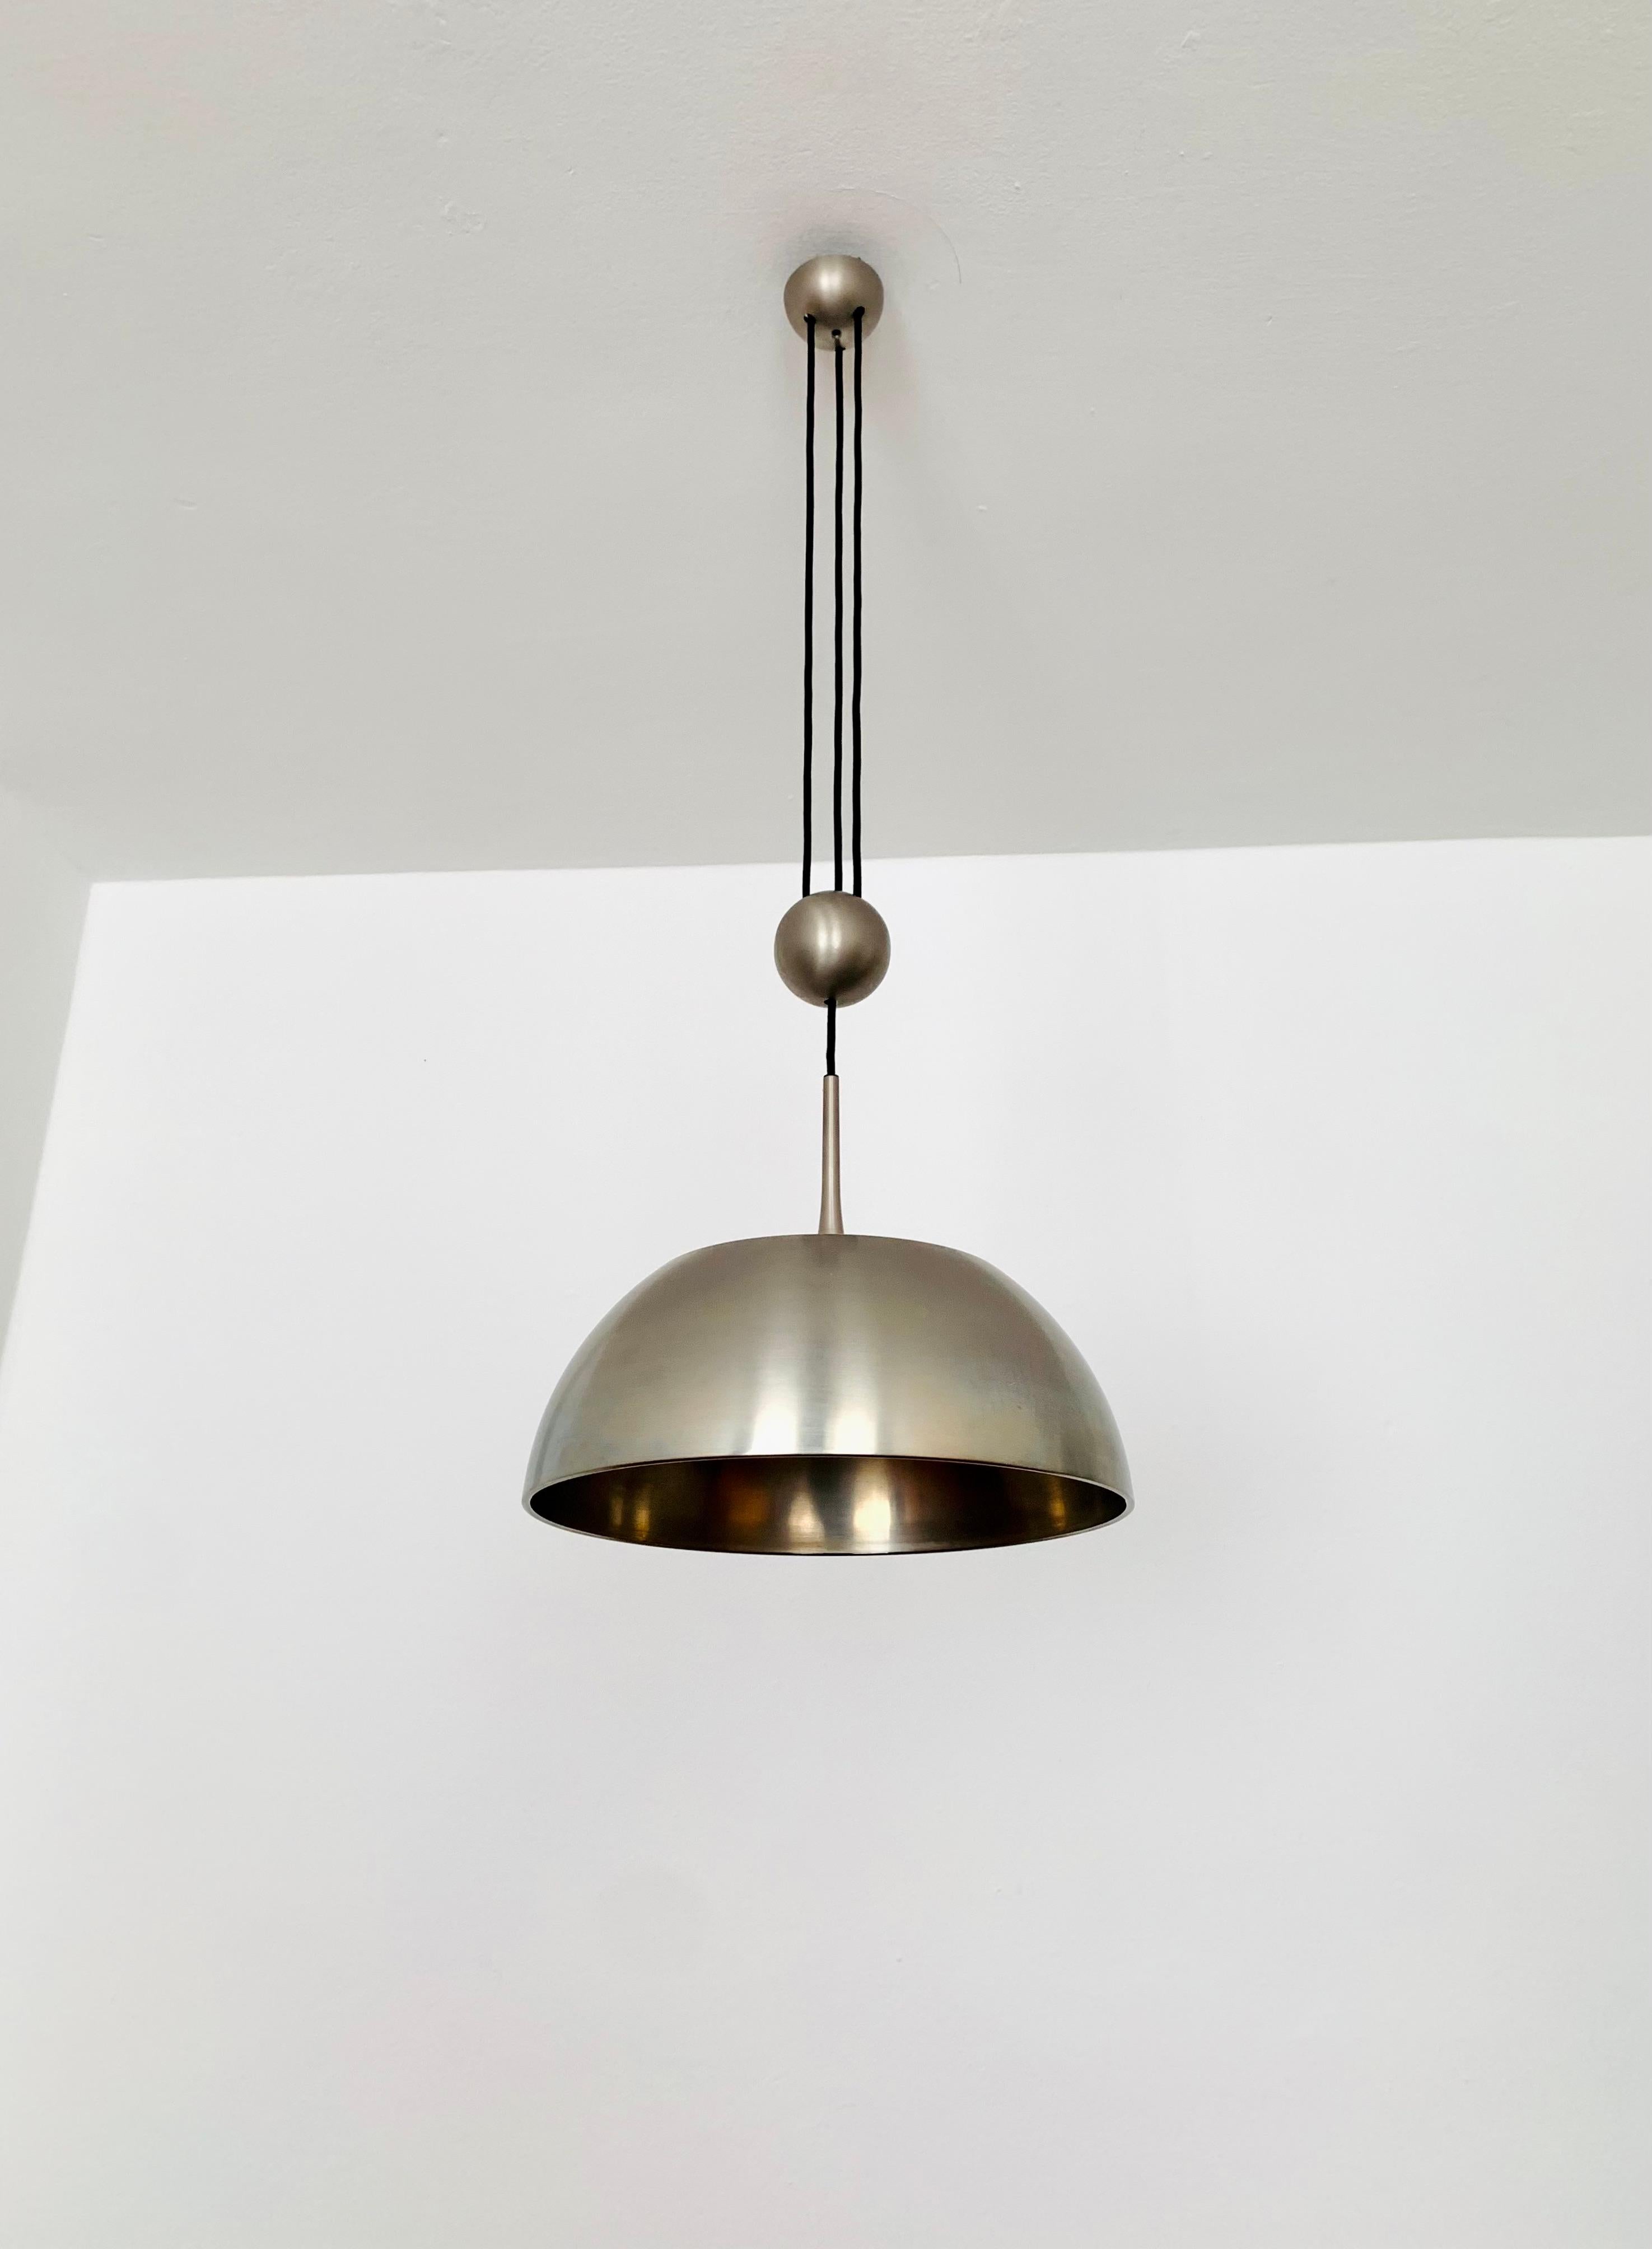 German Adjustable Pendant Lamp with Counterweight by Florian Schulz For Sale